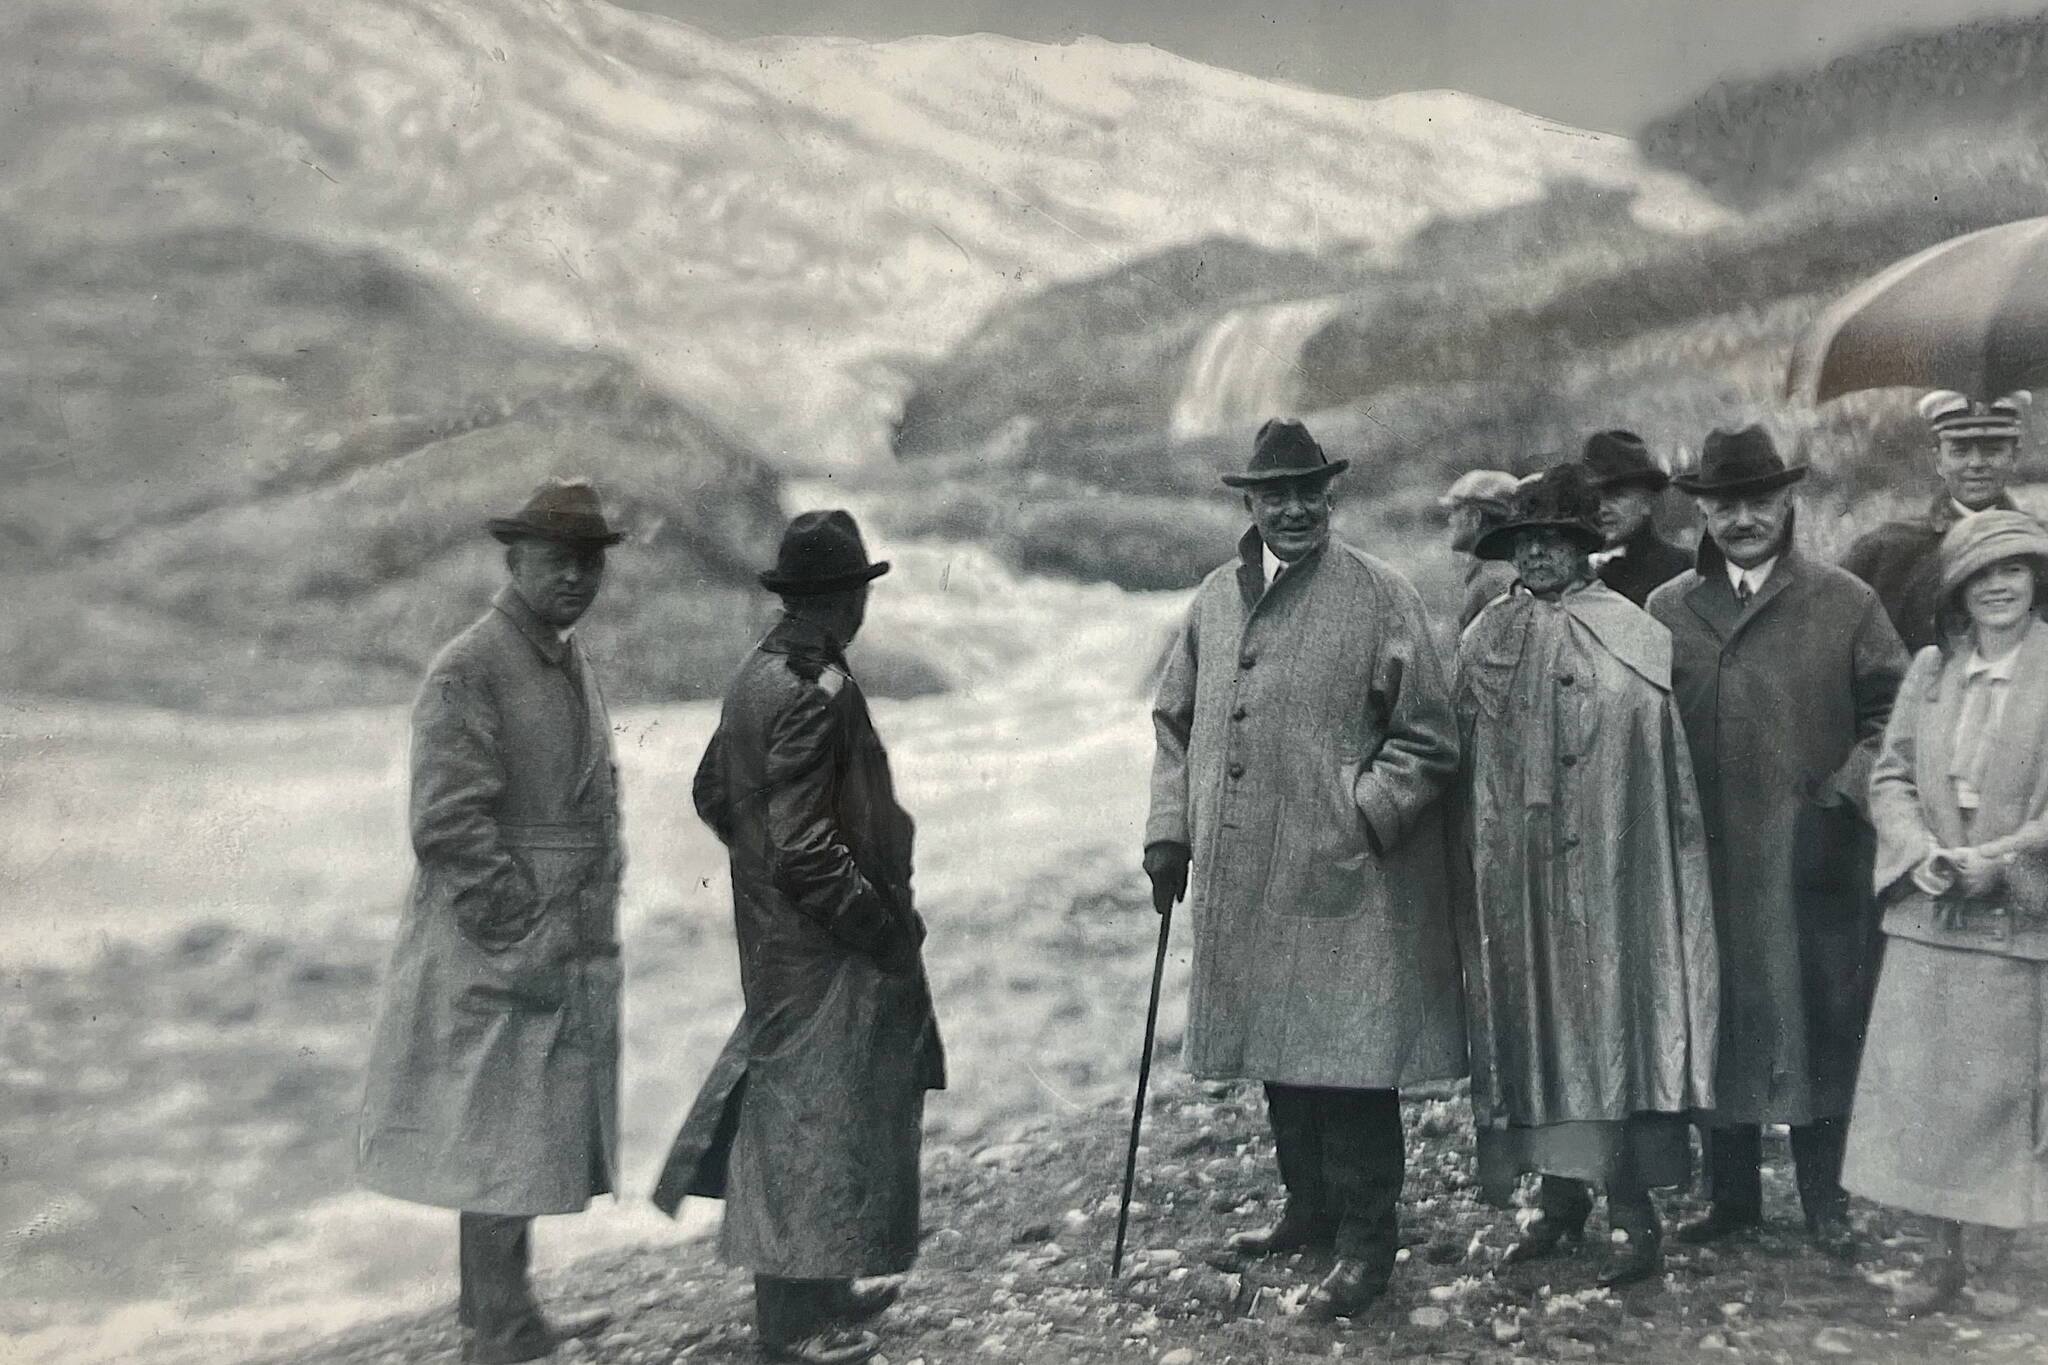 President Warren G. Harding (with walking stick) stands beside his wife (in cape) before Mendenhall Glacier on July 10, 1923. To Mrs. Harding’s side is Alaska Territorial Gov. Scott Bone (with mustache) and his niece Marguerite Bone. Obscured by the dense forest now, an interpretive sign beside the Trail of Time at the glacier commemorates this event and its location. The waterfall draining above the president’s hat is presently a trickle dampening a steep mossy slope. The terrain has dramatically changed in the past 100 years. (Alaska State Library Historical Collection P418-3)